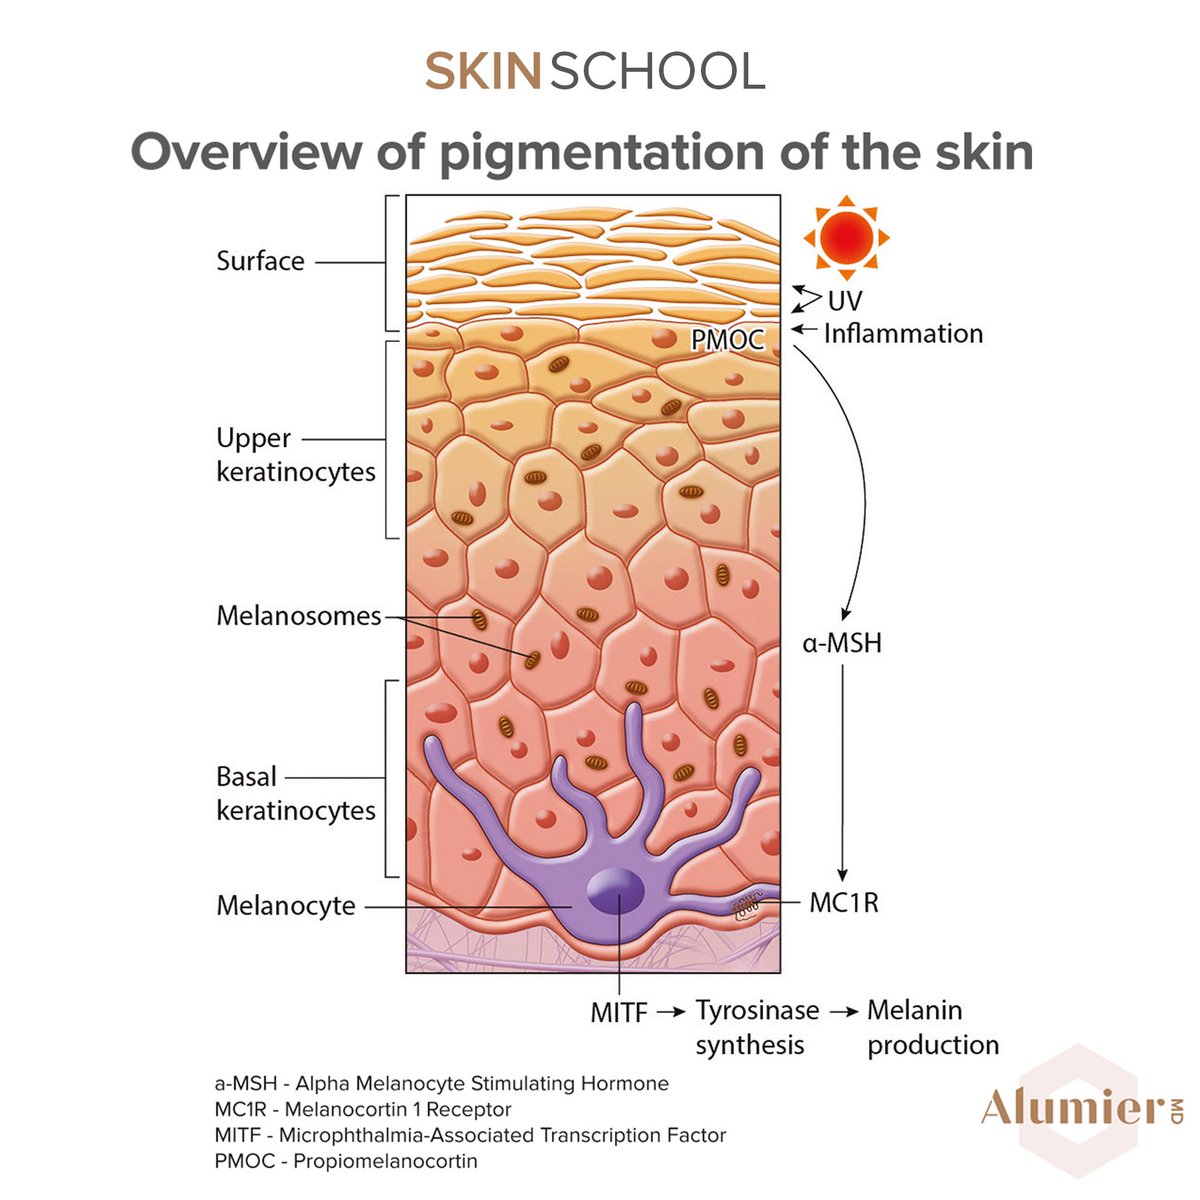 AlumierMD UK on X: "Skin school is in - pigmentation physiology! Skin  colour originates in the basal layer of the epidermis where melanocytes are  and upon UV exposure these cells produce pigment